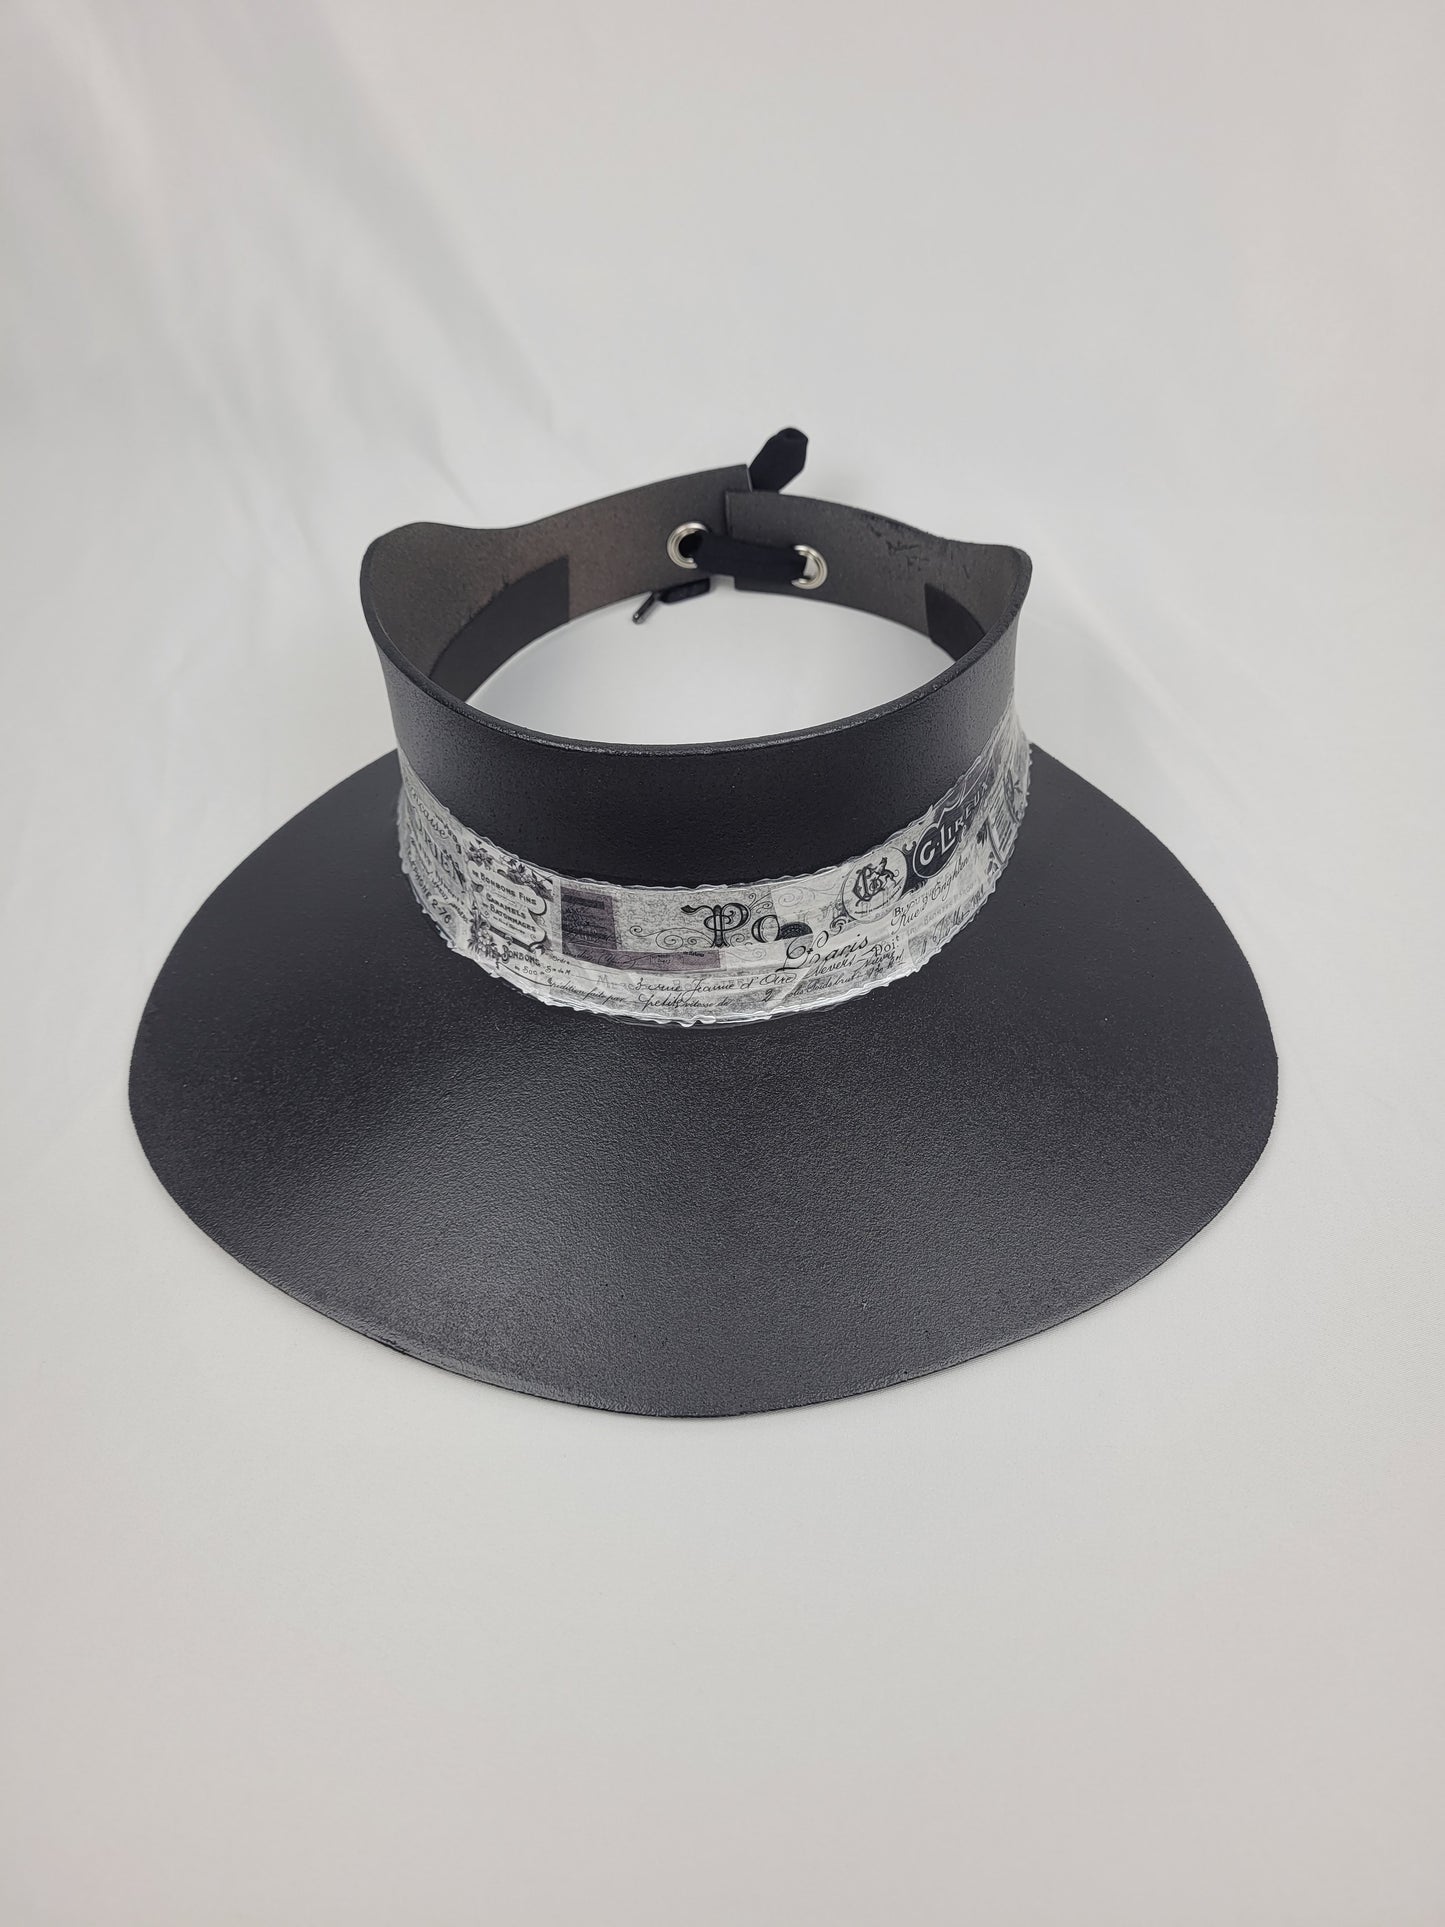 Timeless Black Audrey Sun Visor Hat with Paris Inspired Band and Silver Accents: Walks, Garden Parties, UV Resistant